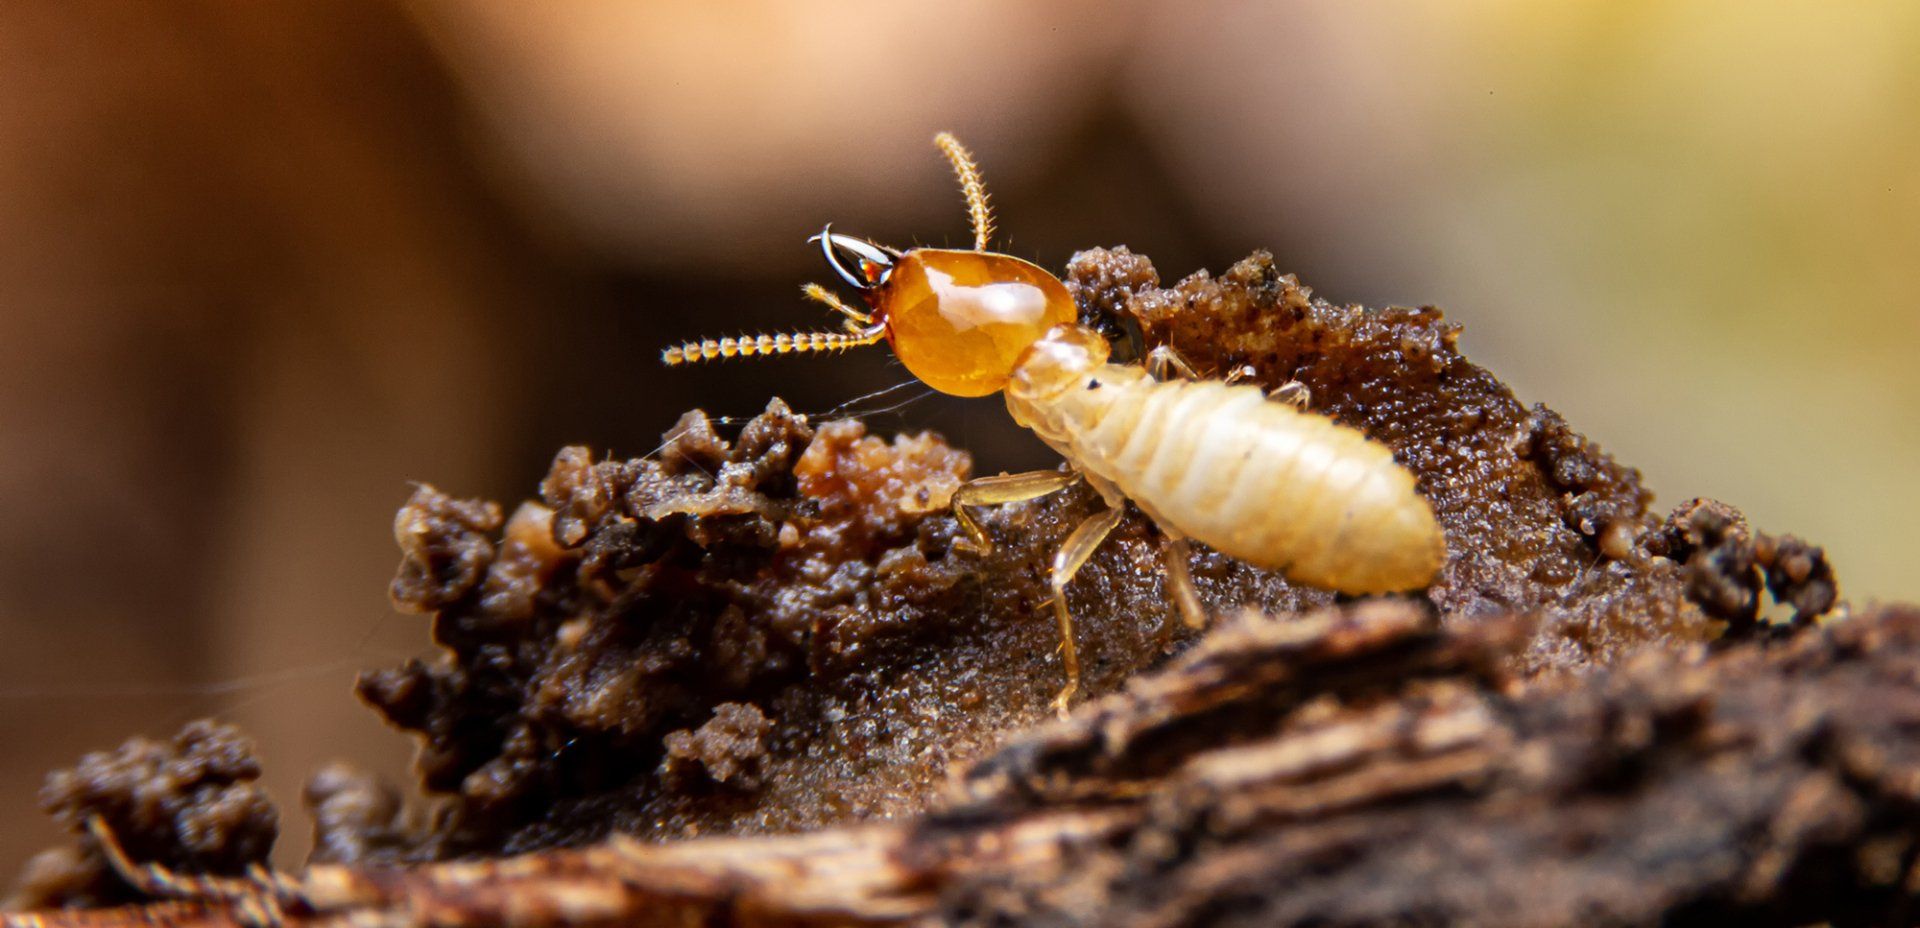 Take Care of a Termite Problem With Steve's Pest Control